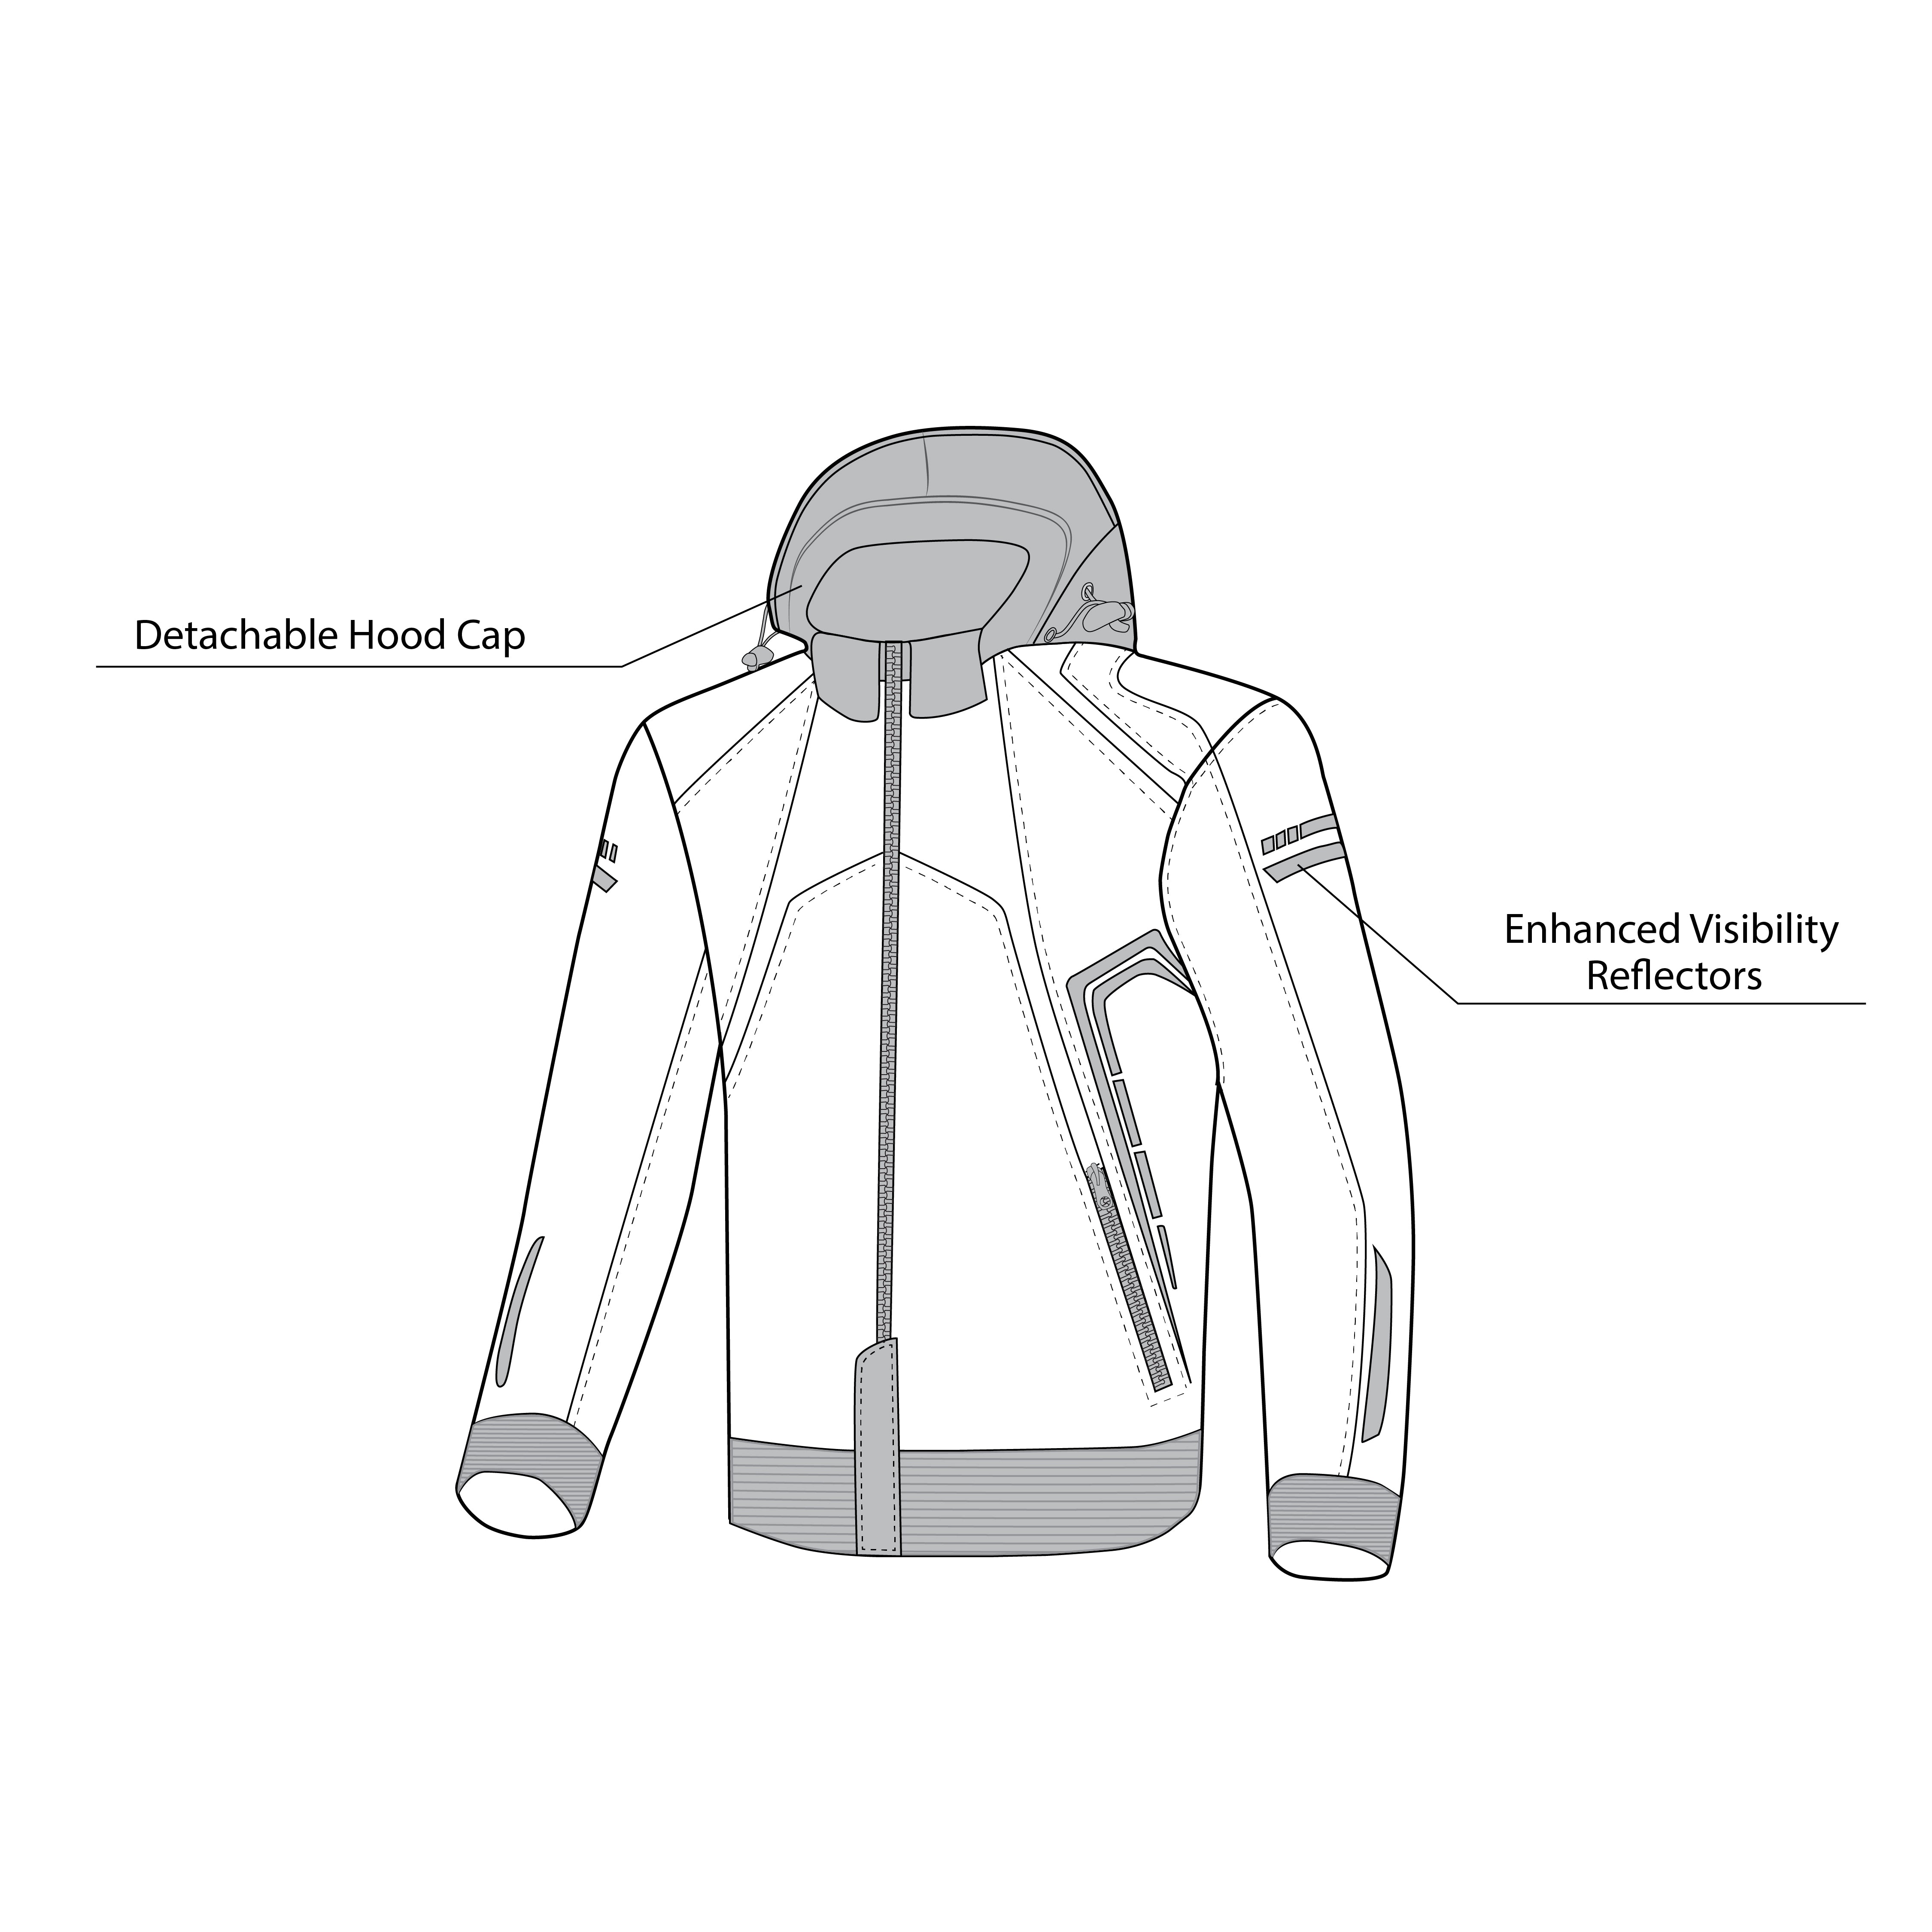 infographic sketch bela breeze softshell hoodie black and blue top front side view